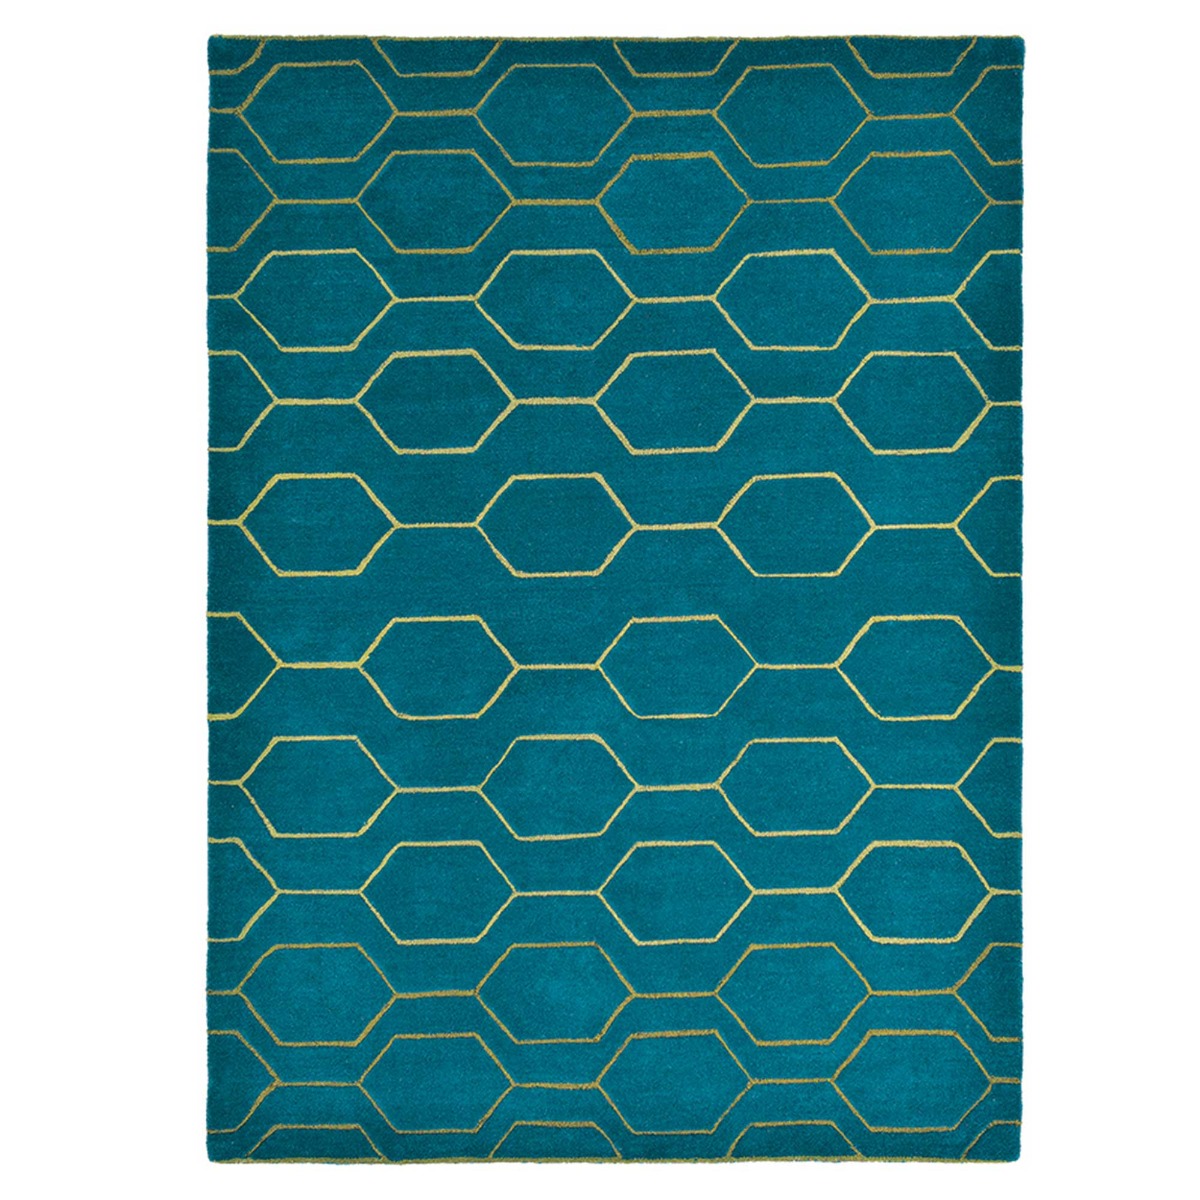 Deco Teal 170x240Cm Rug, Square Wool Blend | W170cm | Barker & Stonehouse